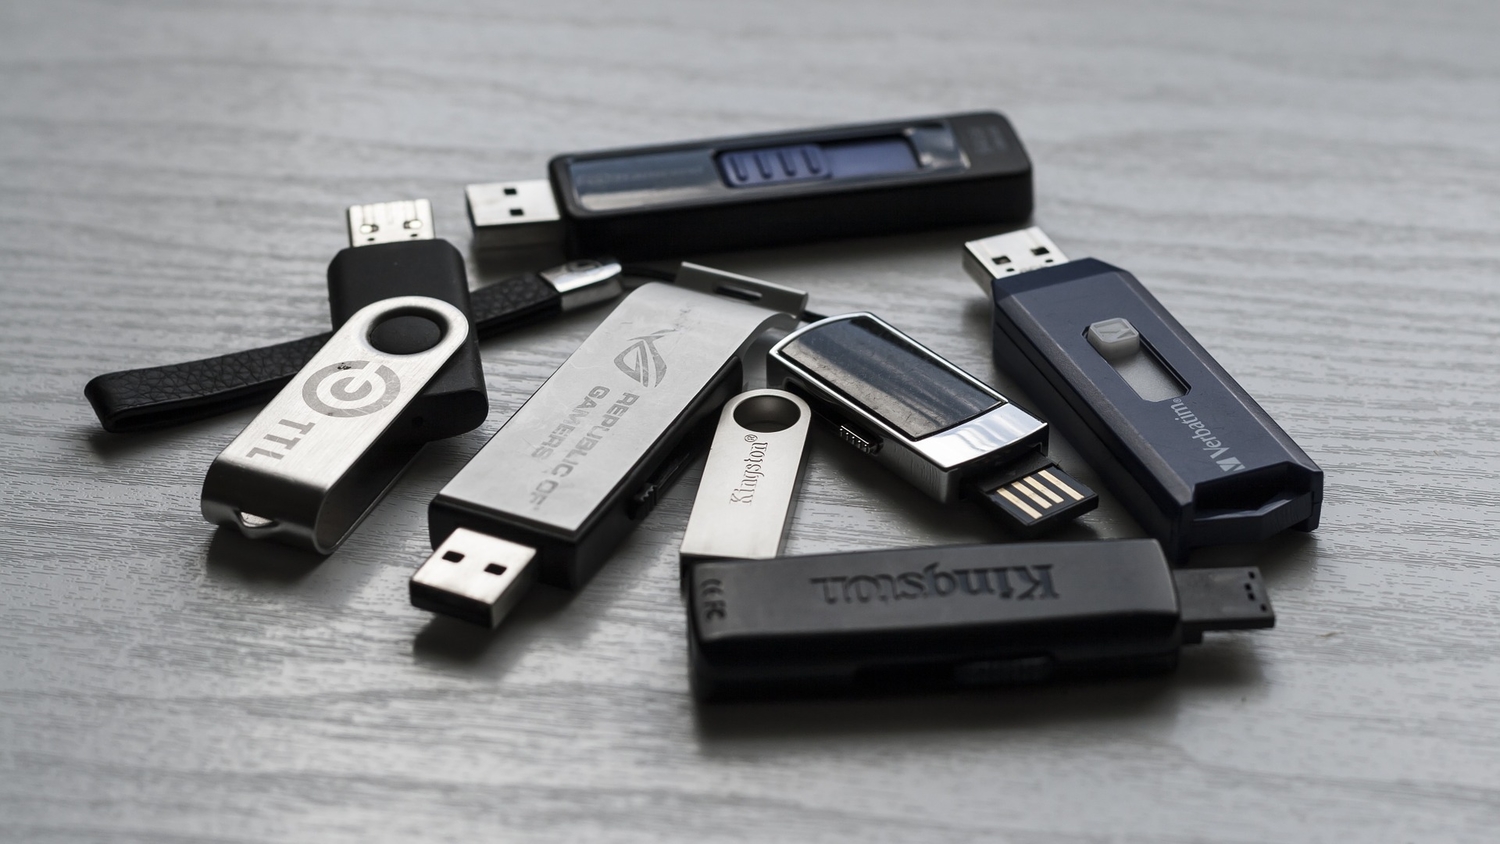 How to safely find out what's on mysterious USB | Popular